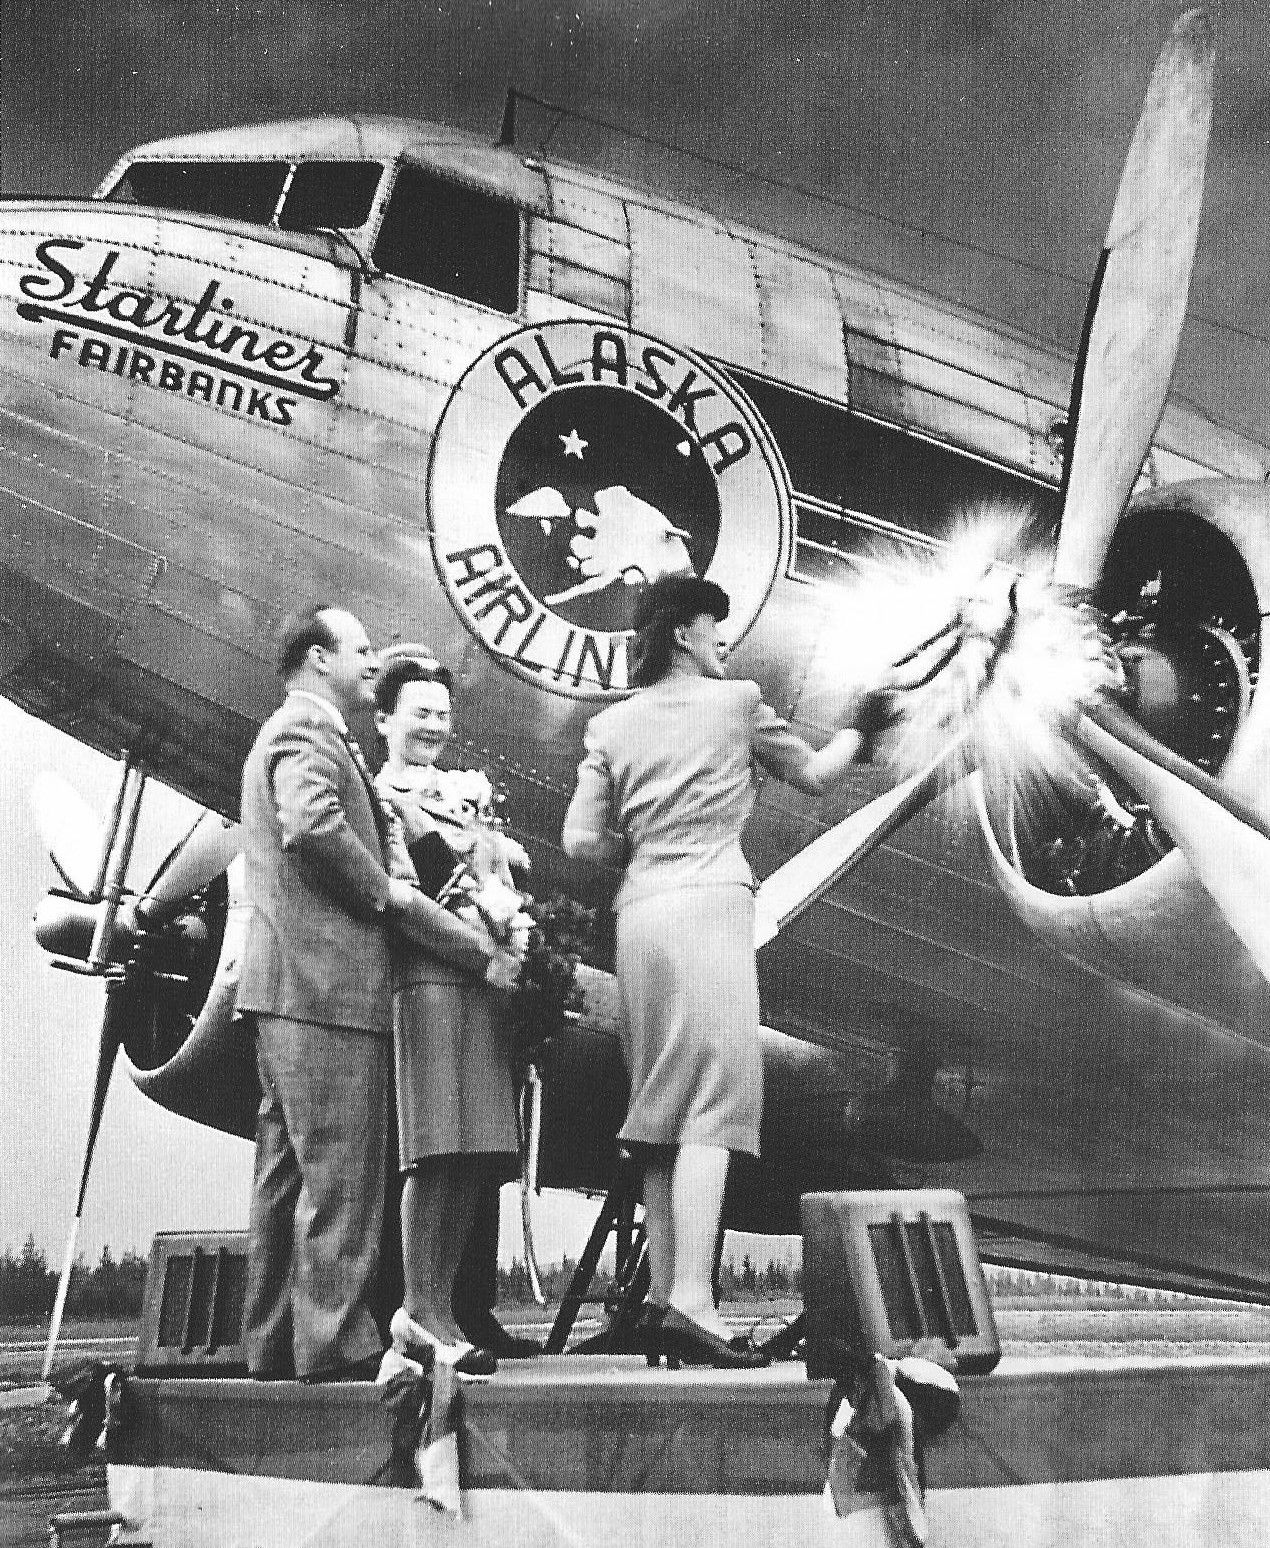 Starliner Fairbanks Christening With A Man & Two Women in 1940s Formal Clothes Standing While One Woman Breaks Champagne on the DC-3's Left Propeller Hub